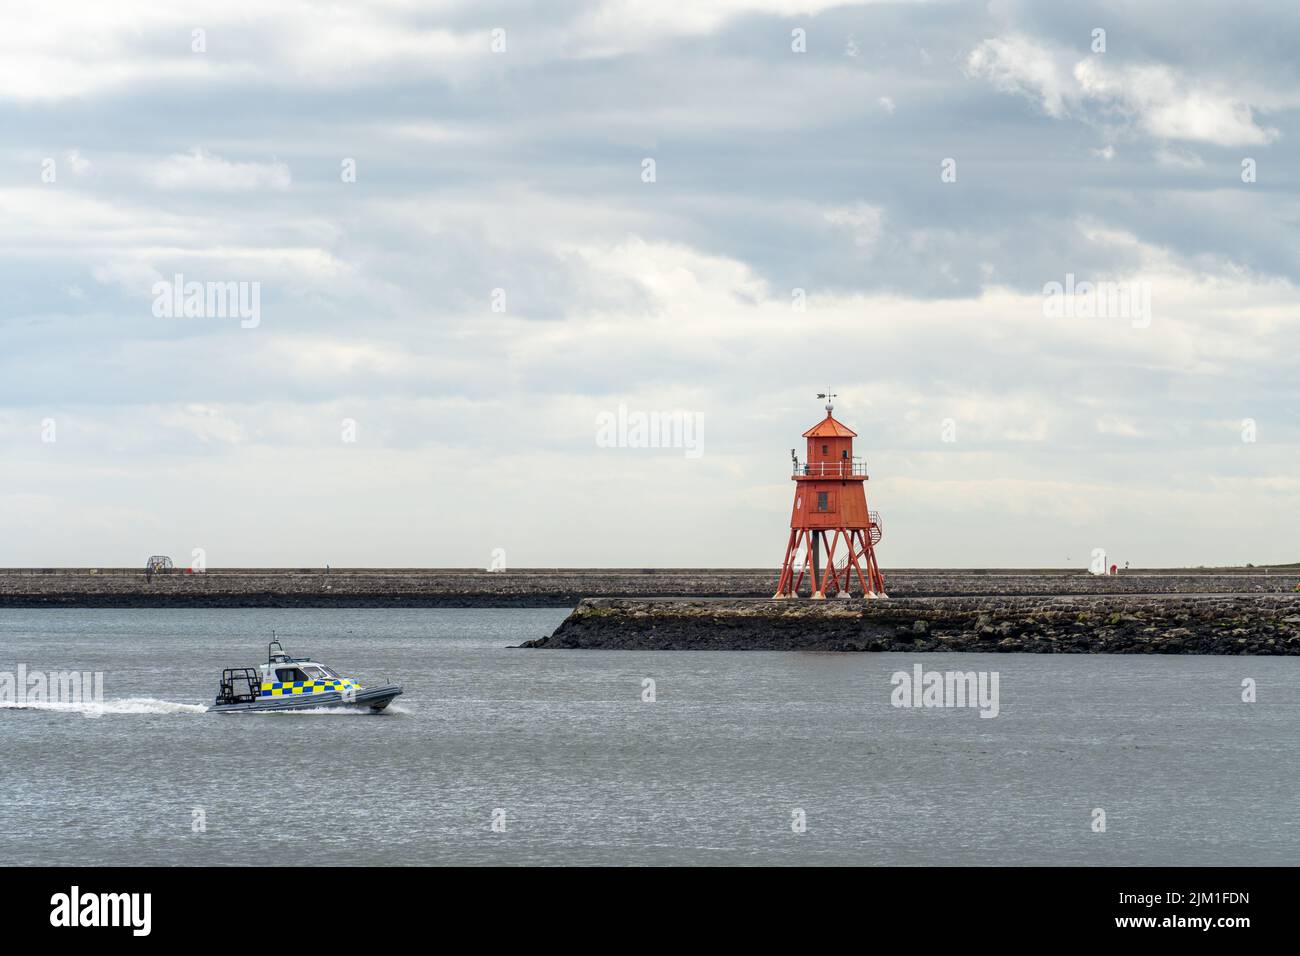 View of the Herd Groyne lighthouse, South Shields, UK, in the River Tyne, with a river police boat passing by. Stock Photo